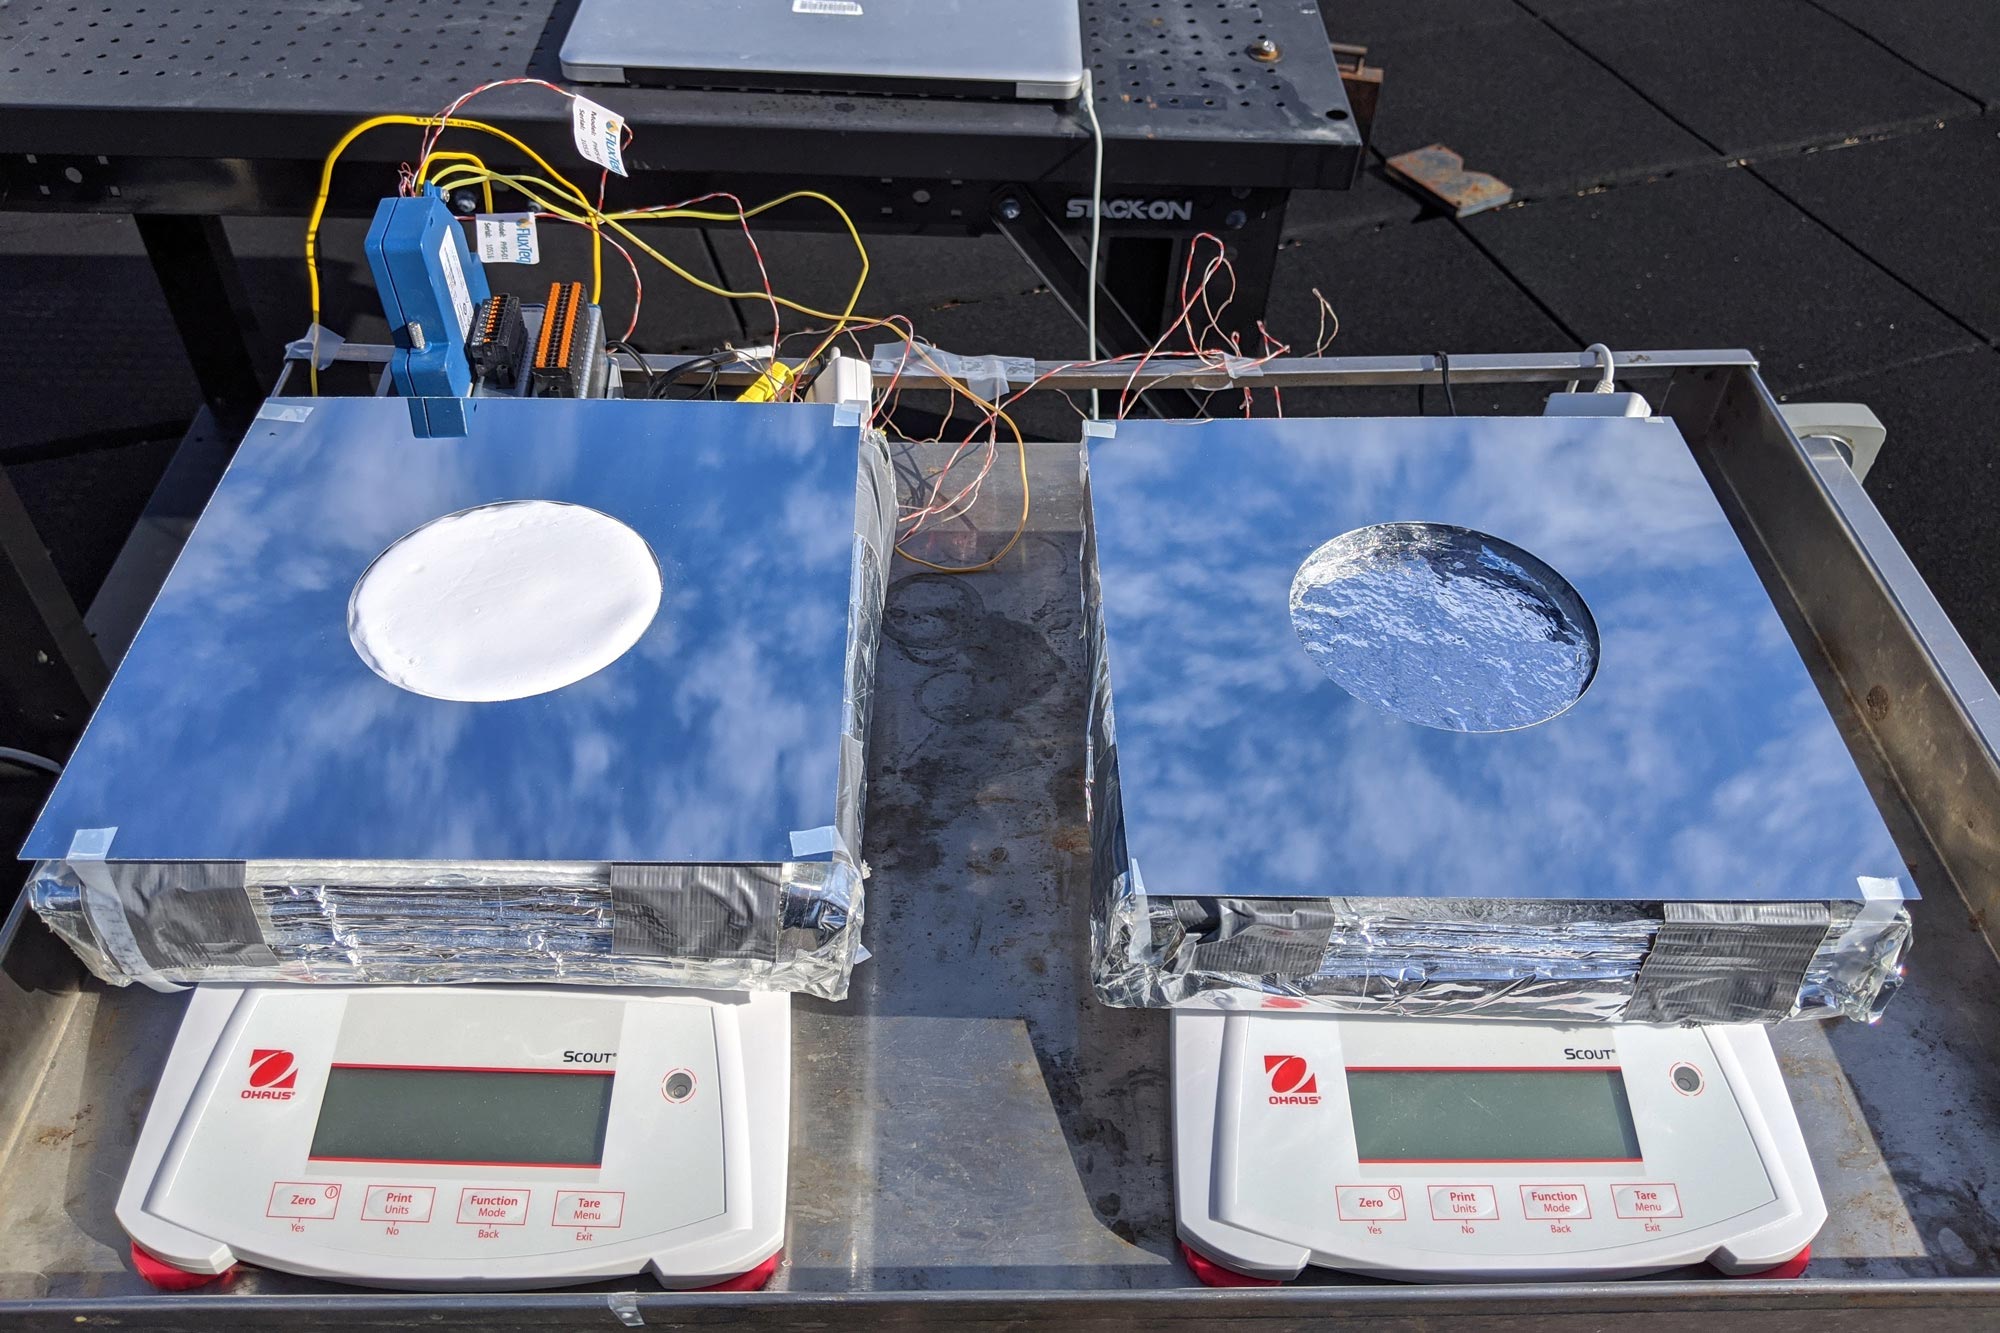 Thermodynamic Magic Enables Cooling without Energy Consumption